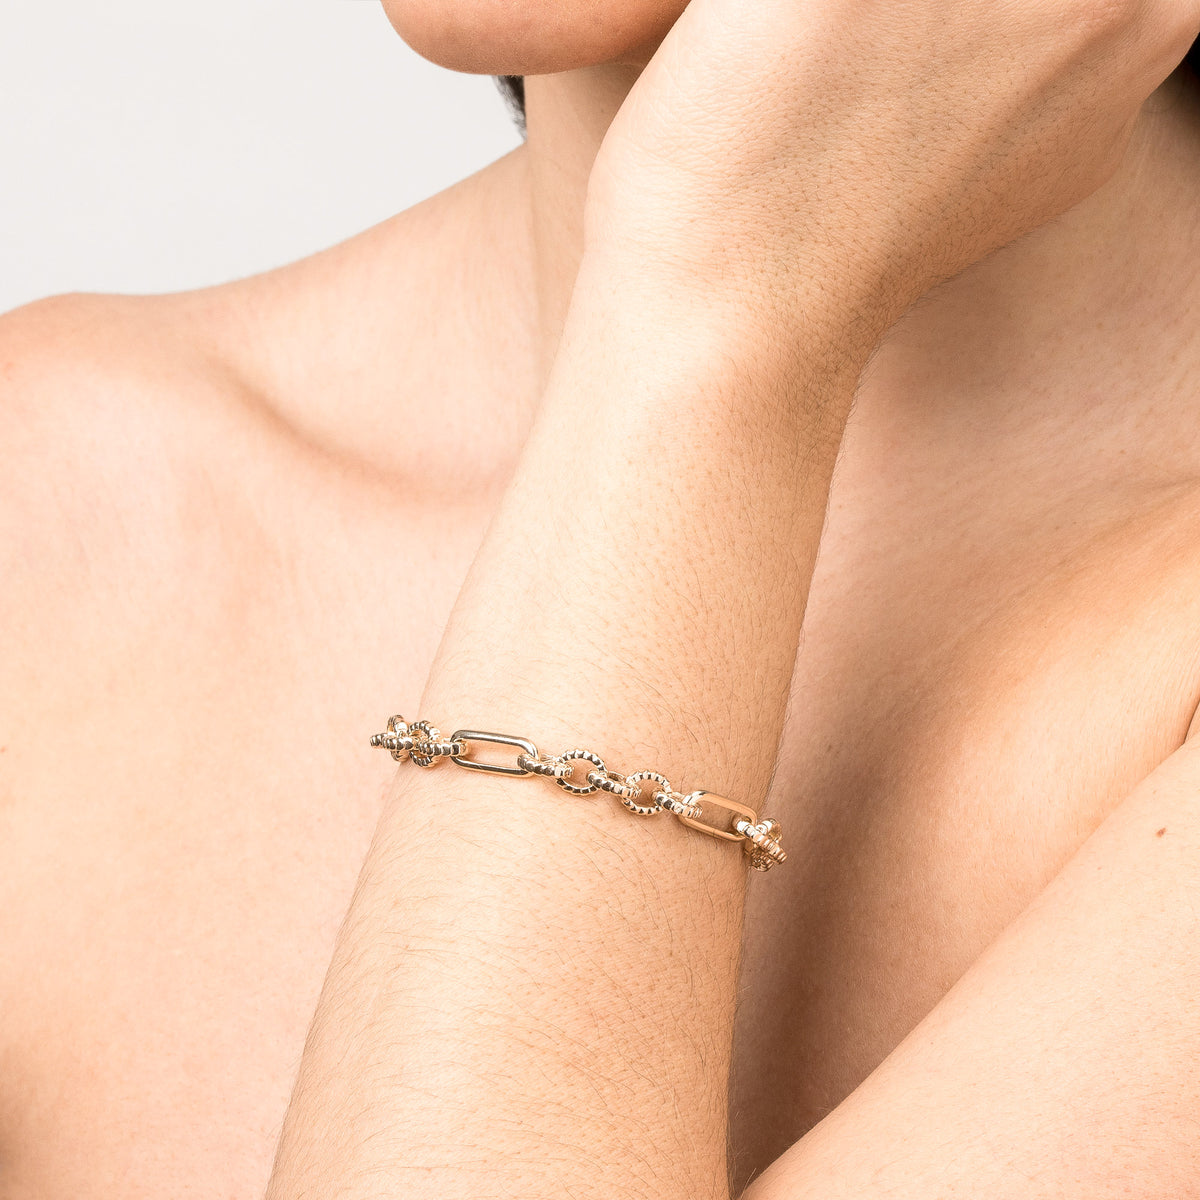 What Does An Infinity Bracelet Mean? - Jewellery Cyprus